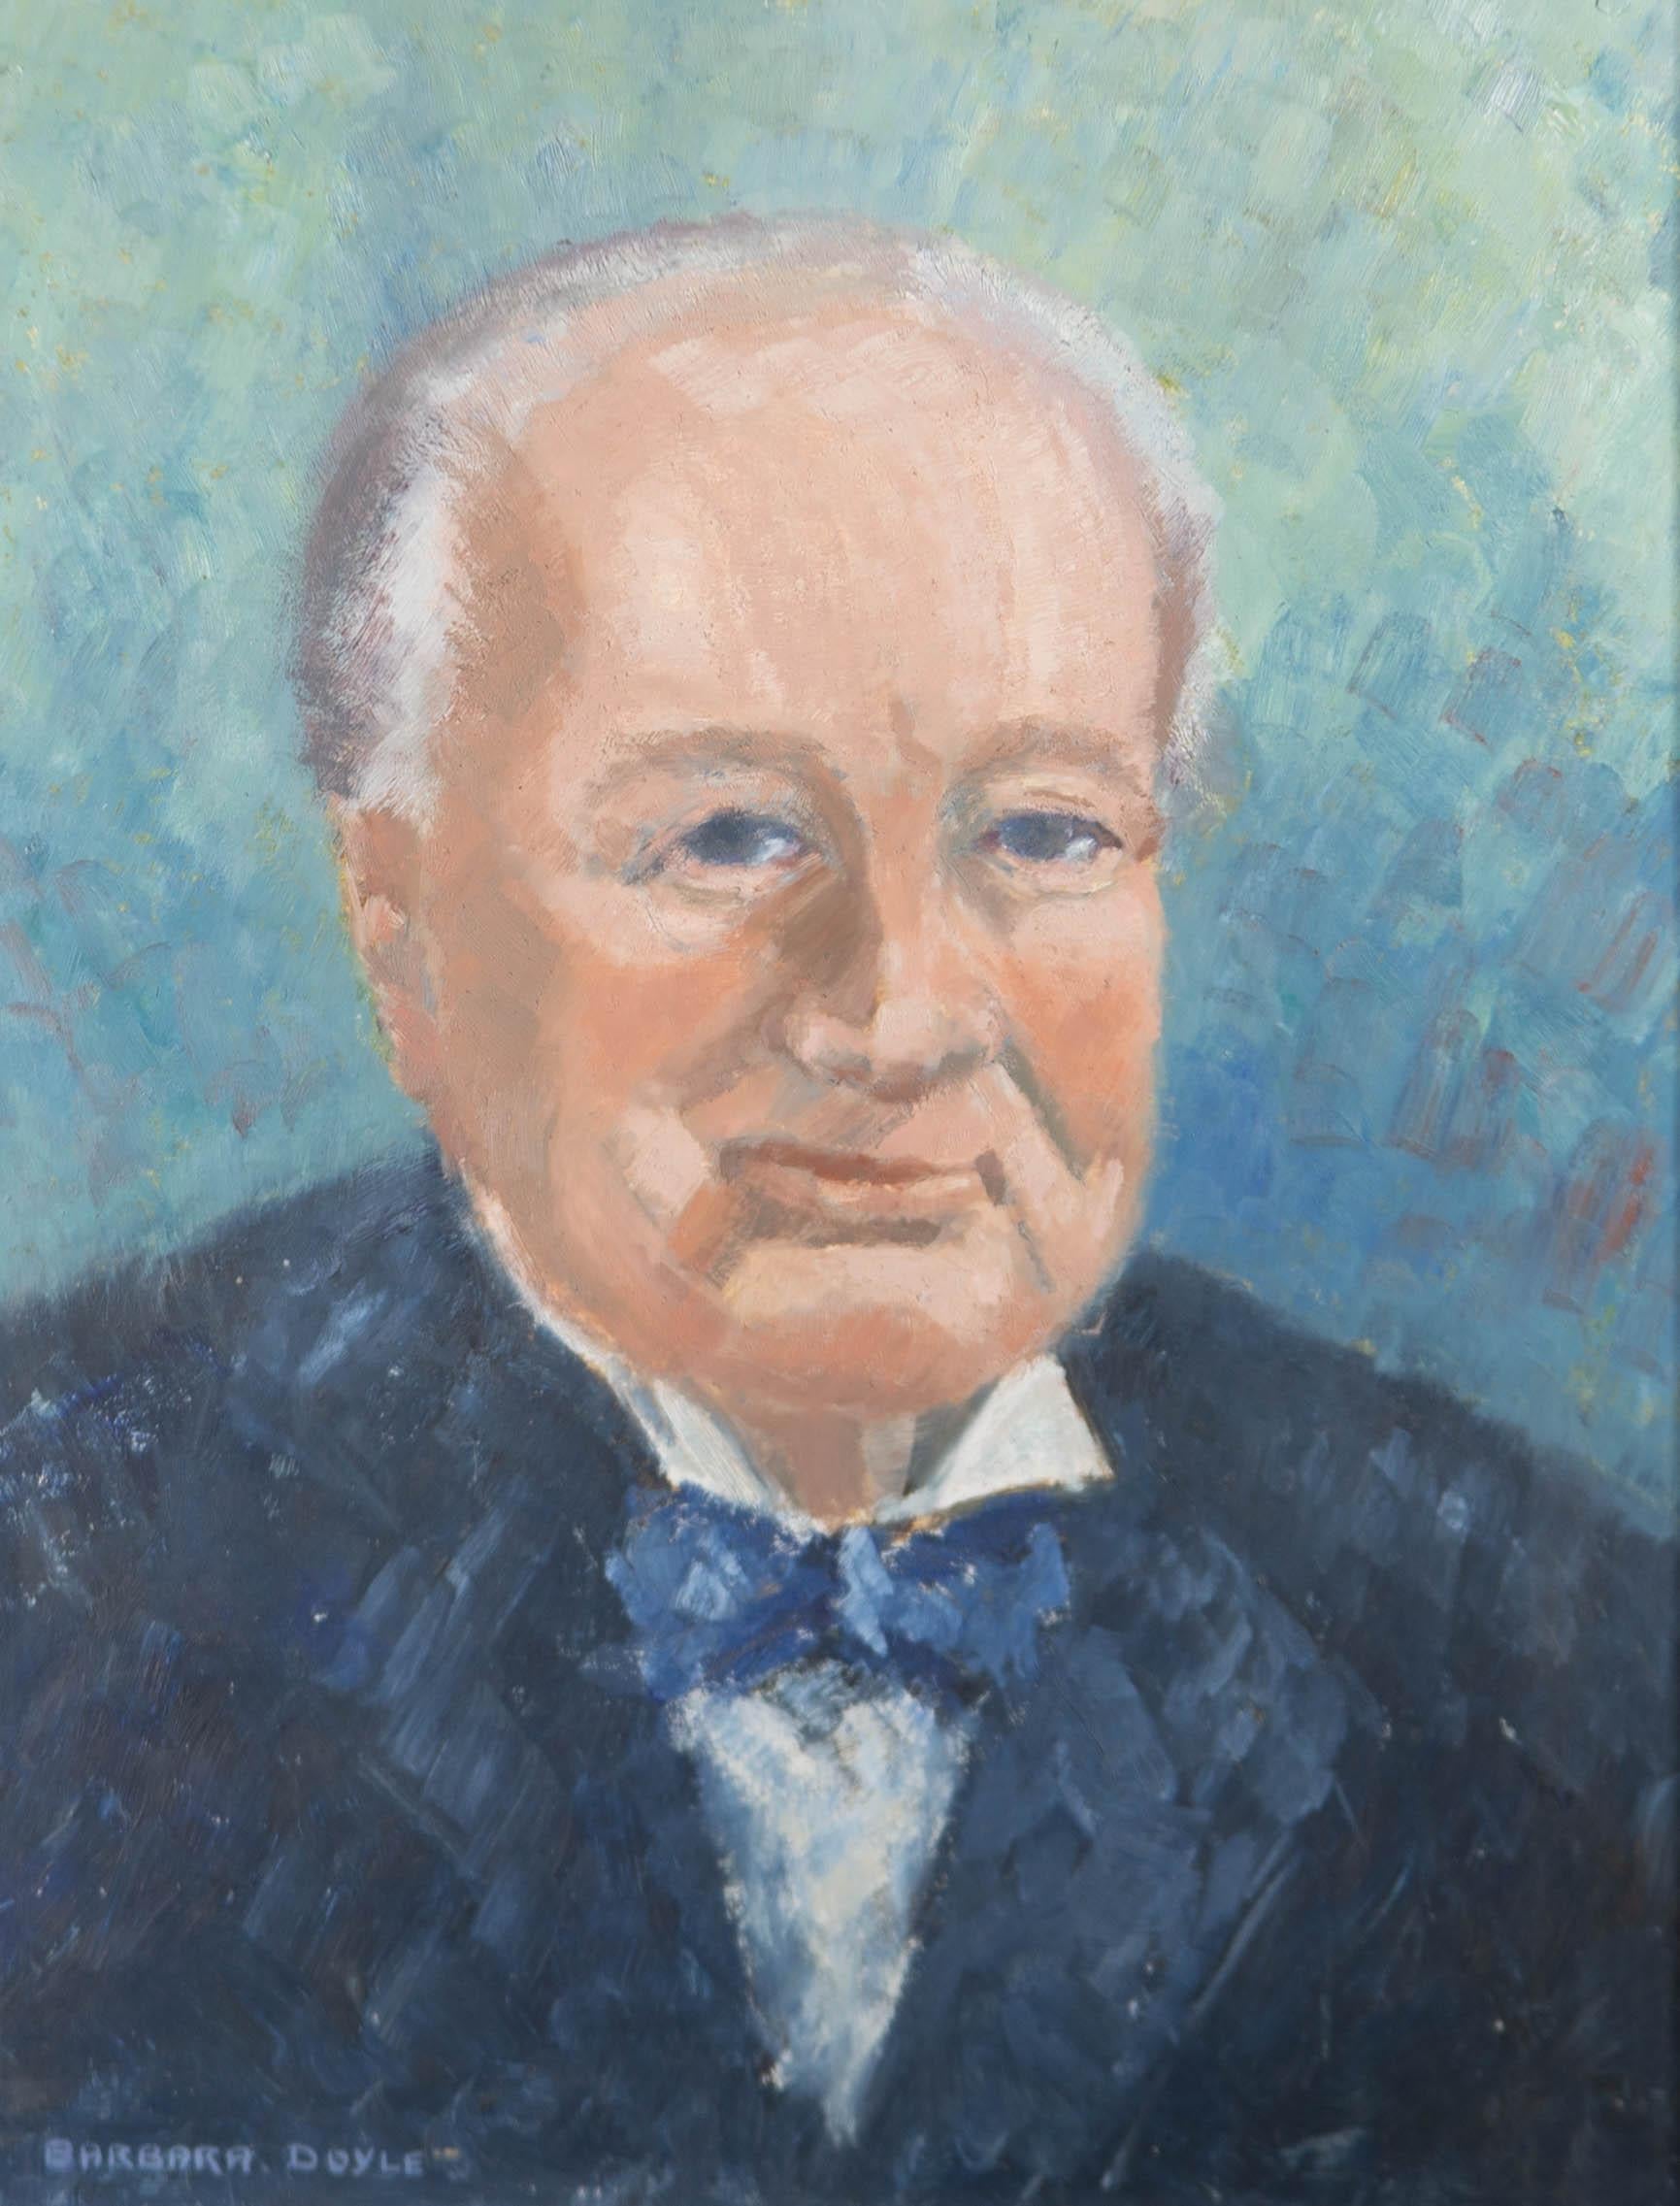 Barbara Doyle (b.1917) - 1967 Oil, Winston Churchill - Painting by Unknown